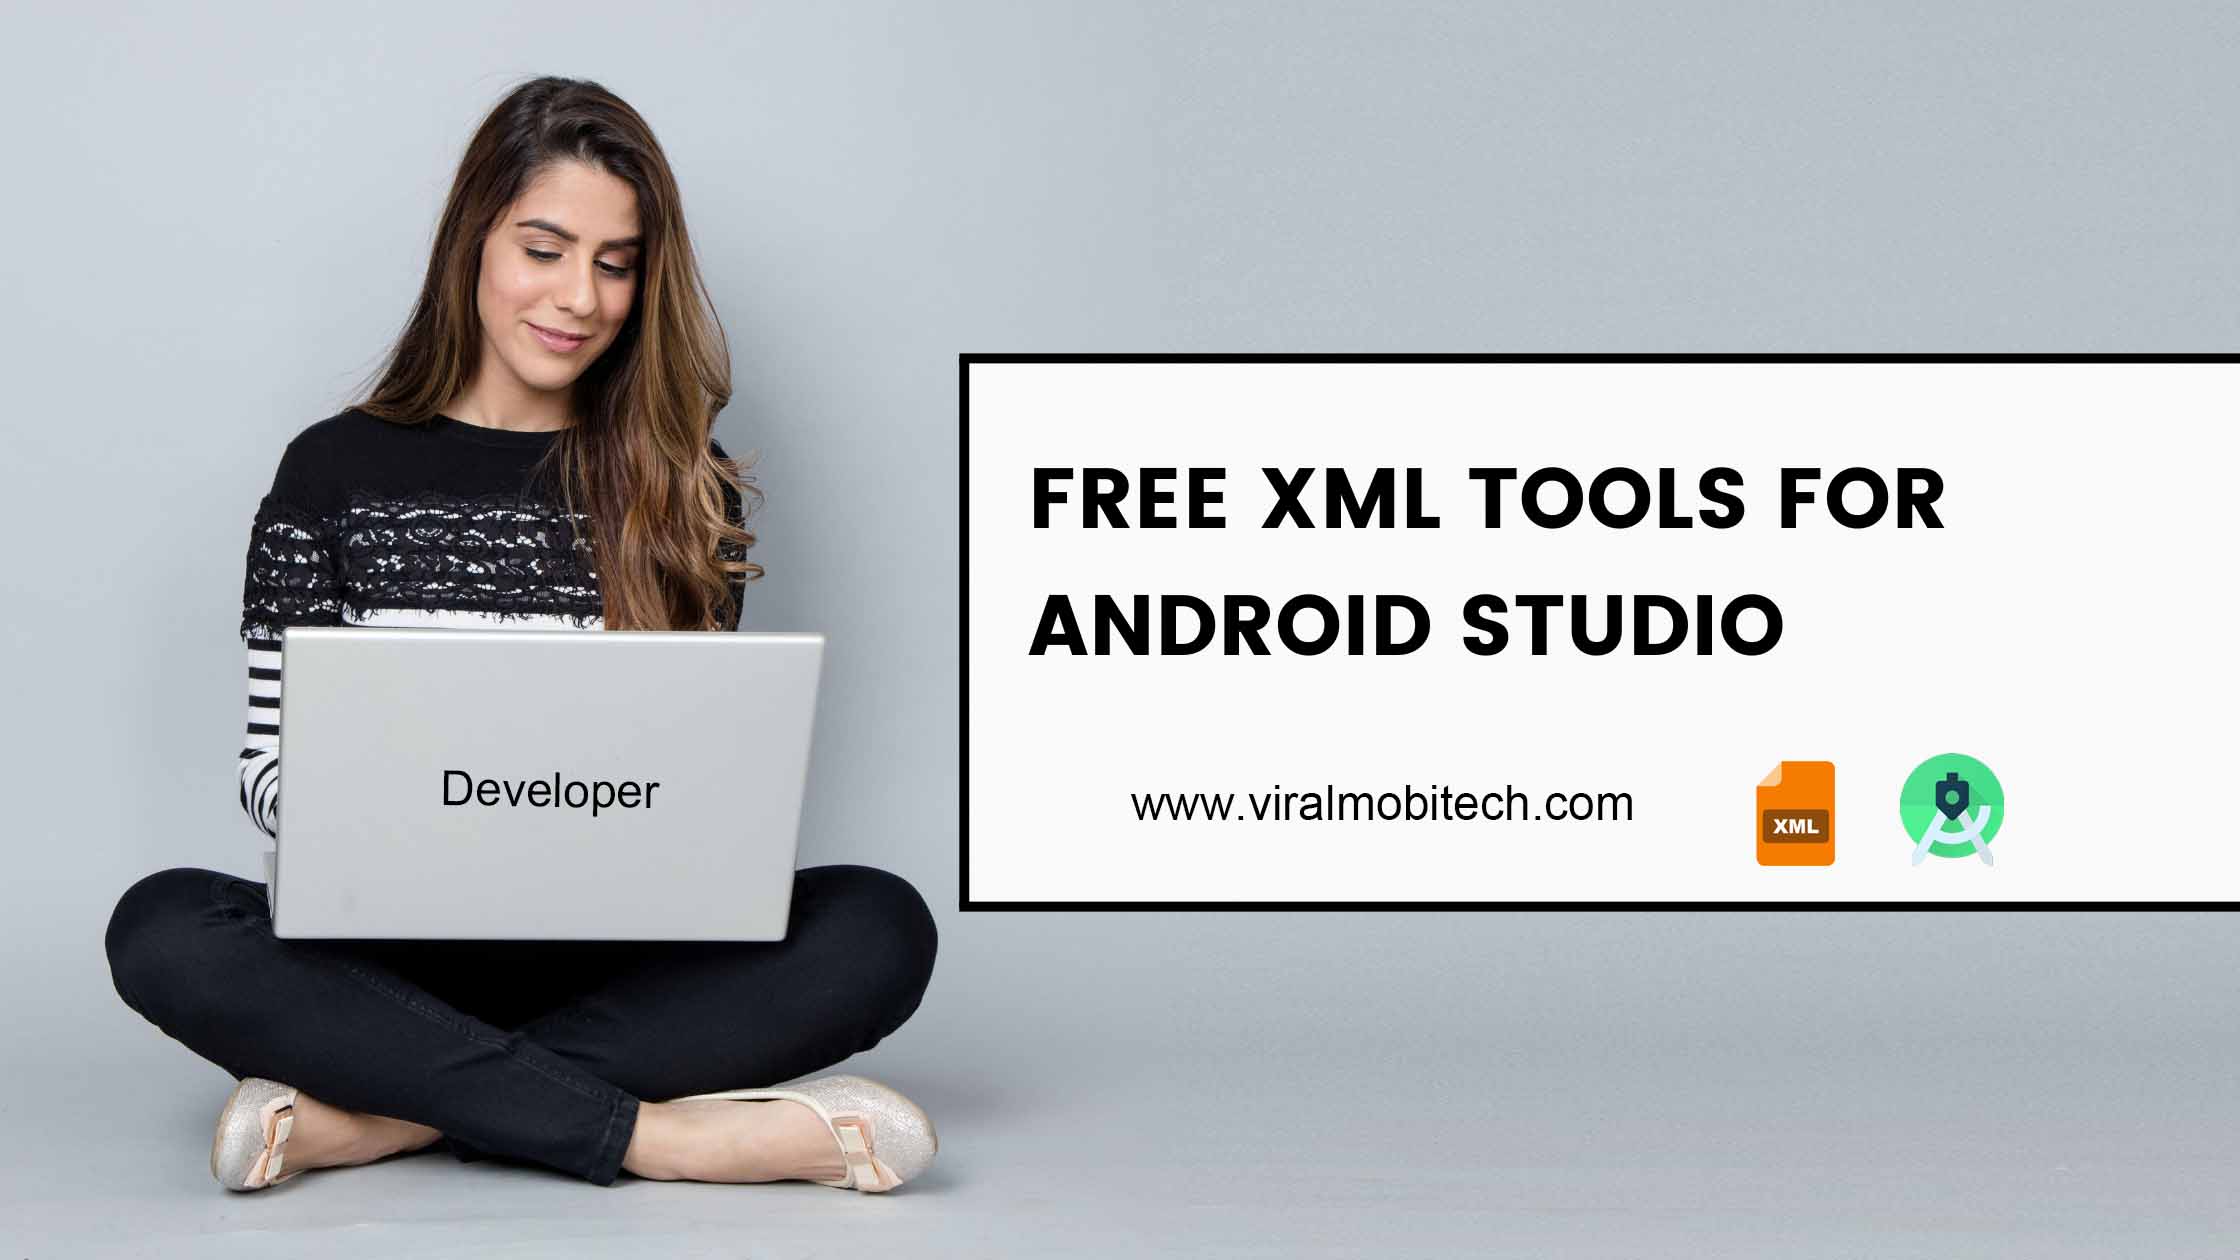 Free XML Tools for Android Studio